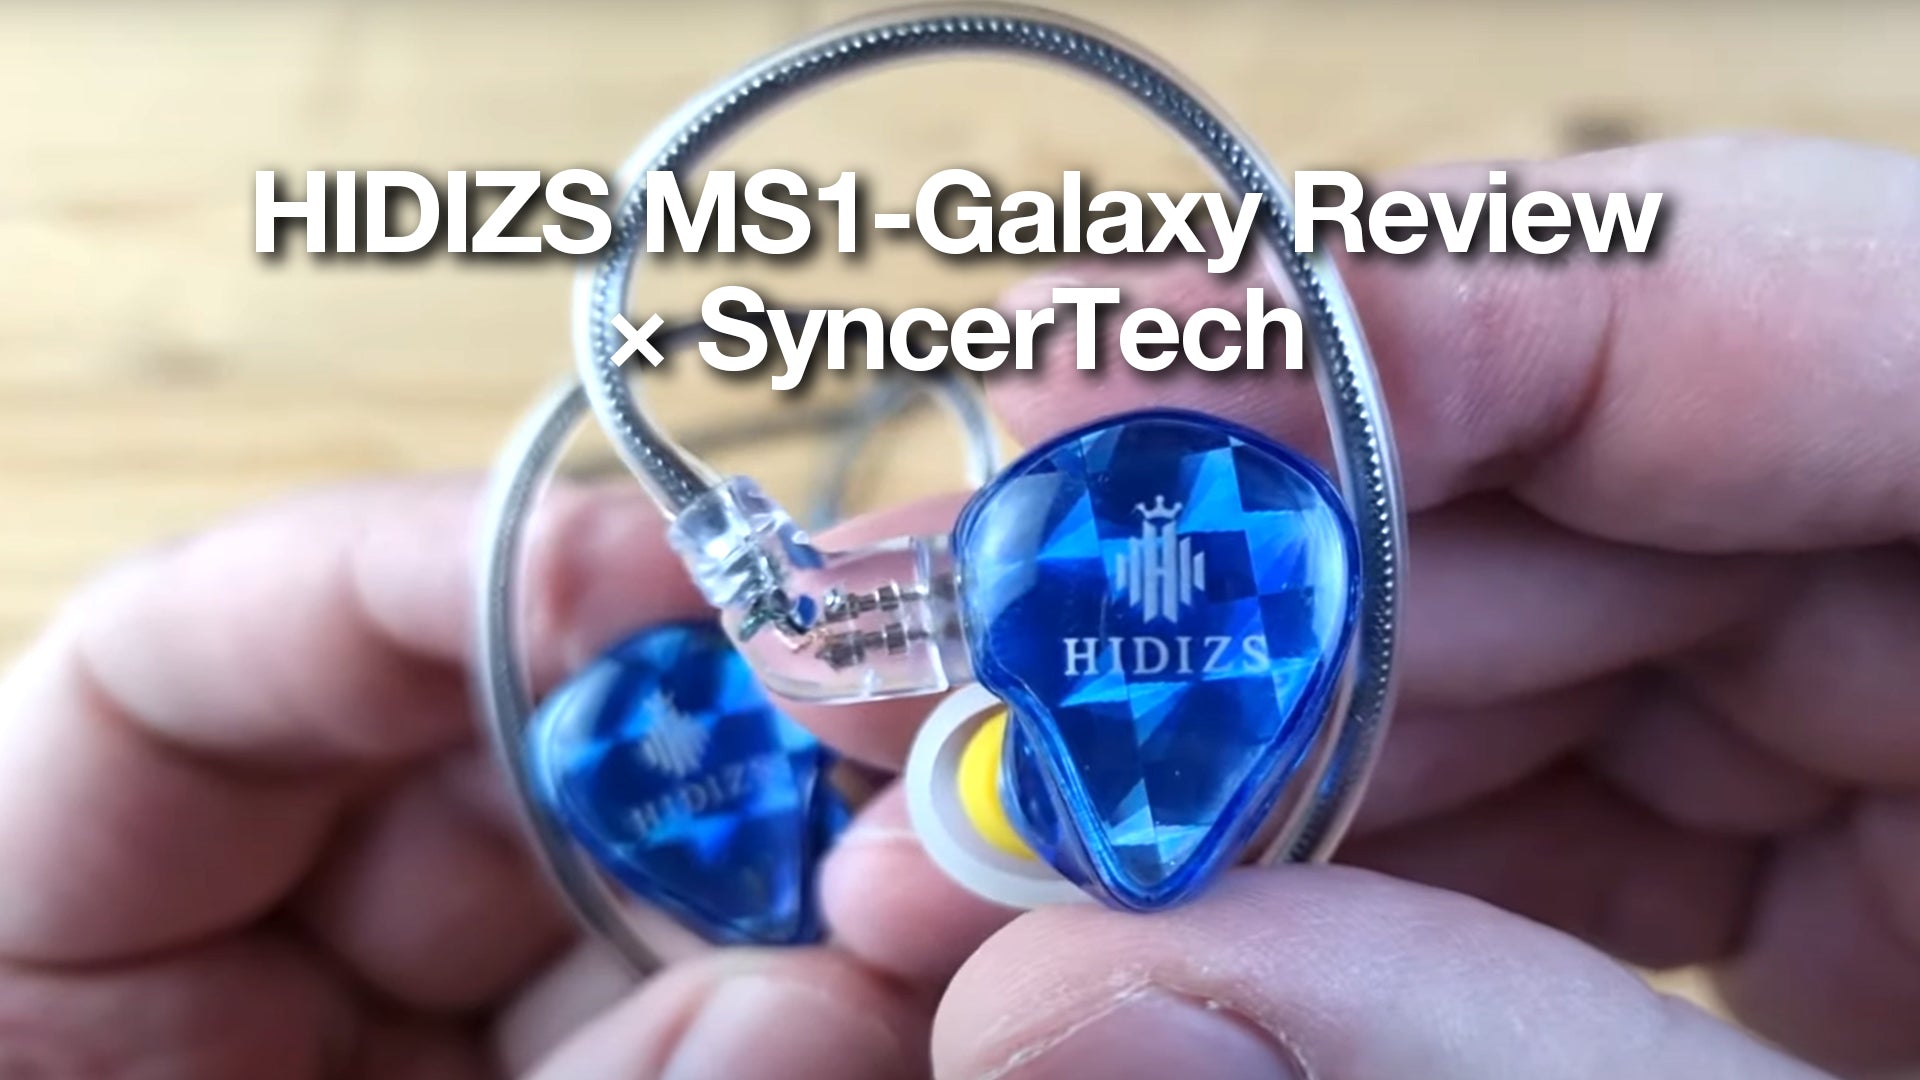 HIDIZS MS1-Galaxy Review - SyncerTech